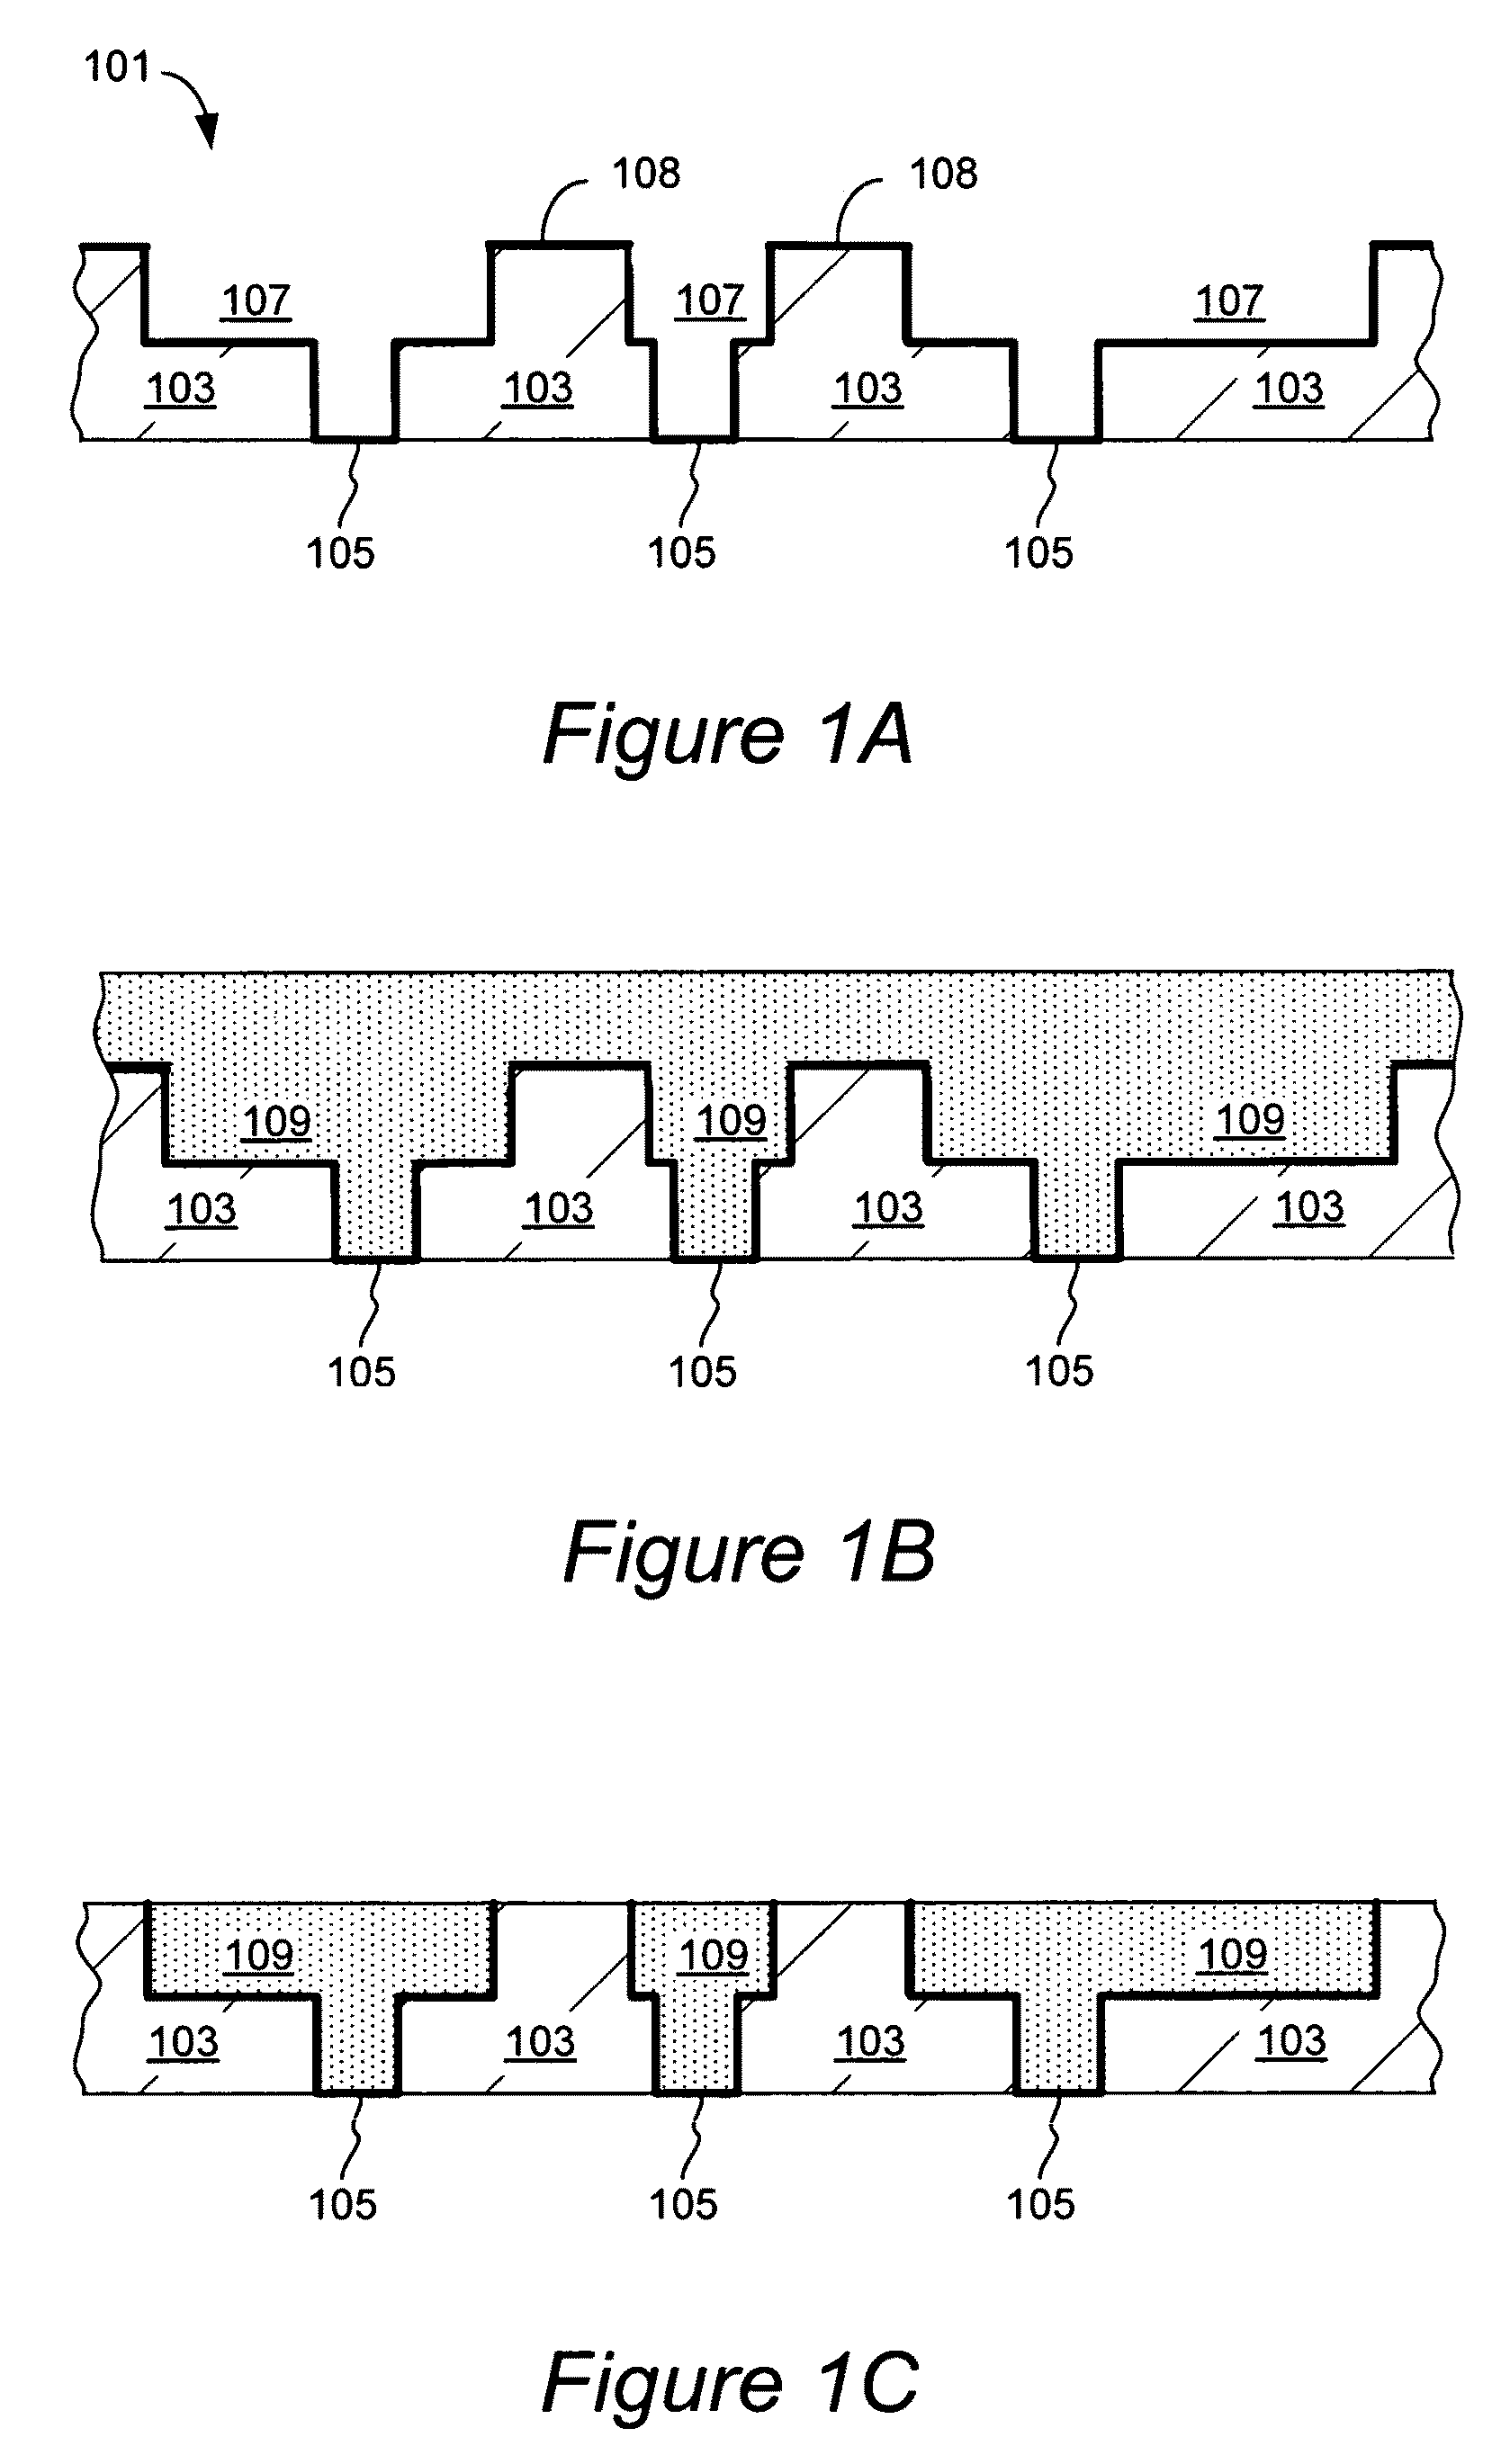 PVD-based metallization methods for fabrication of interconnections in semiconductor devices